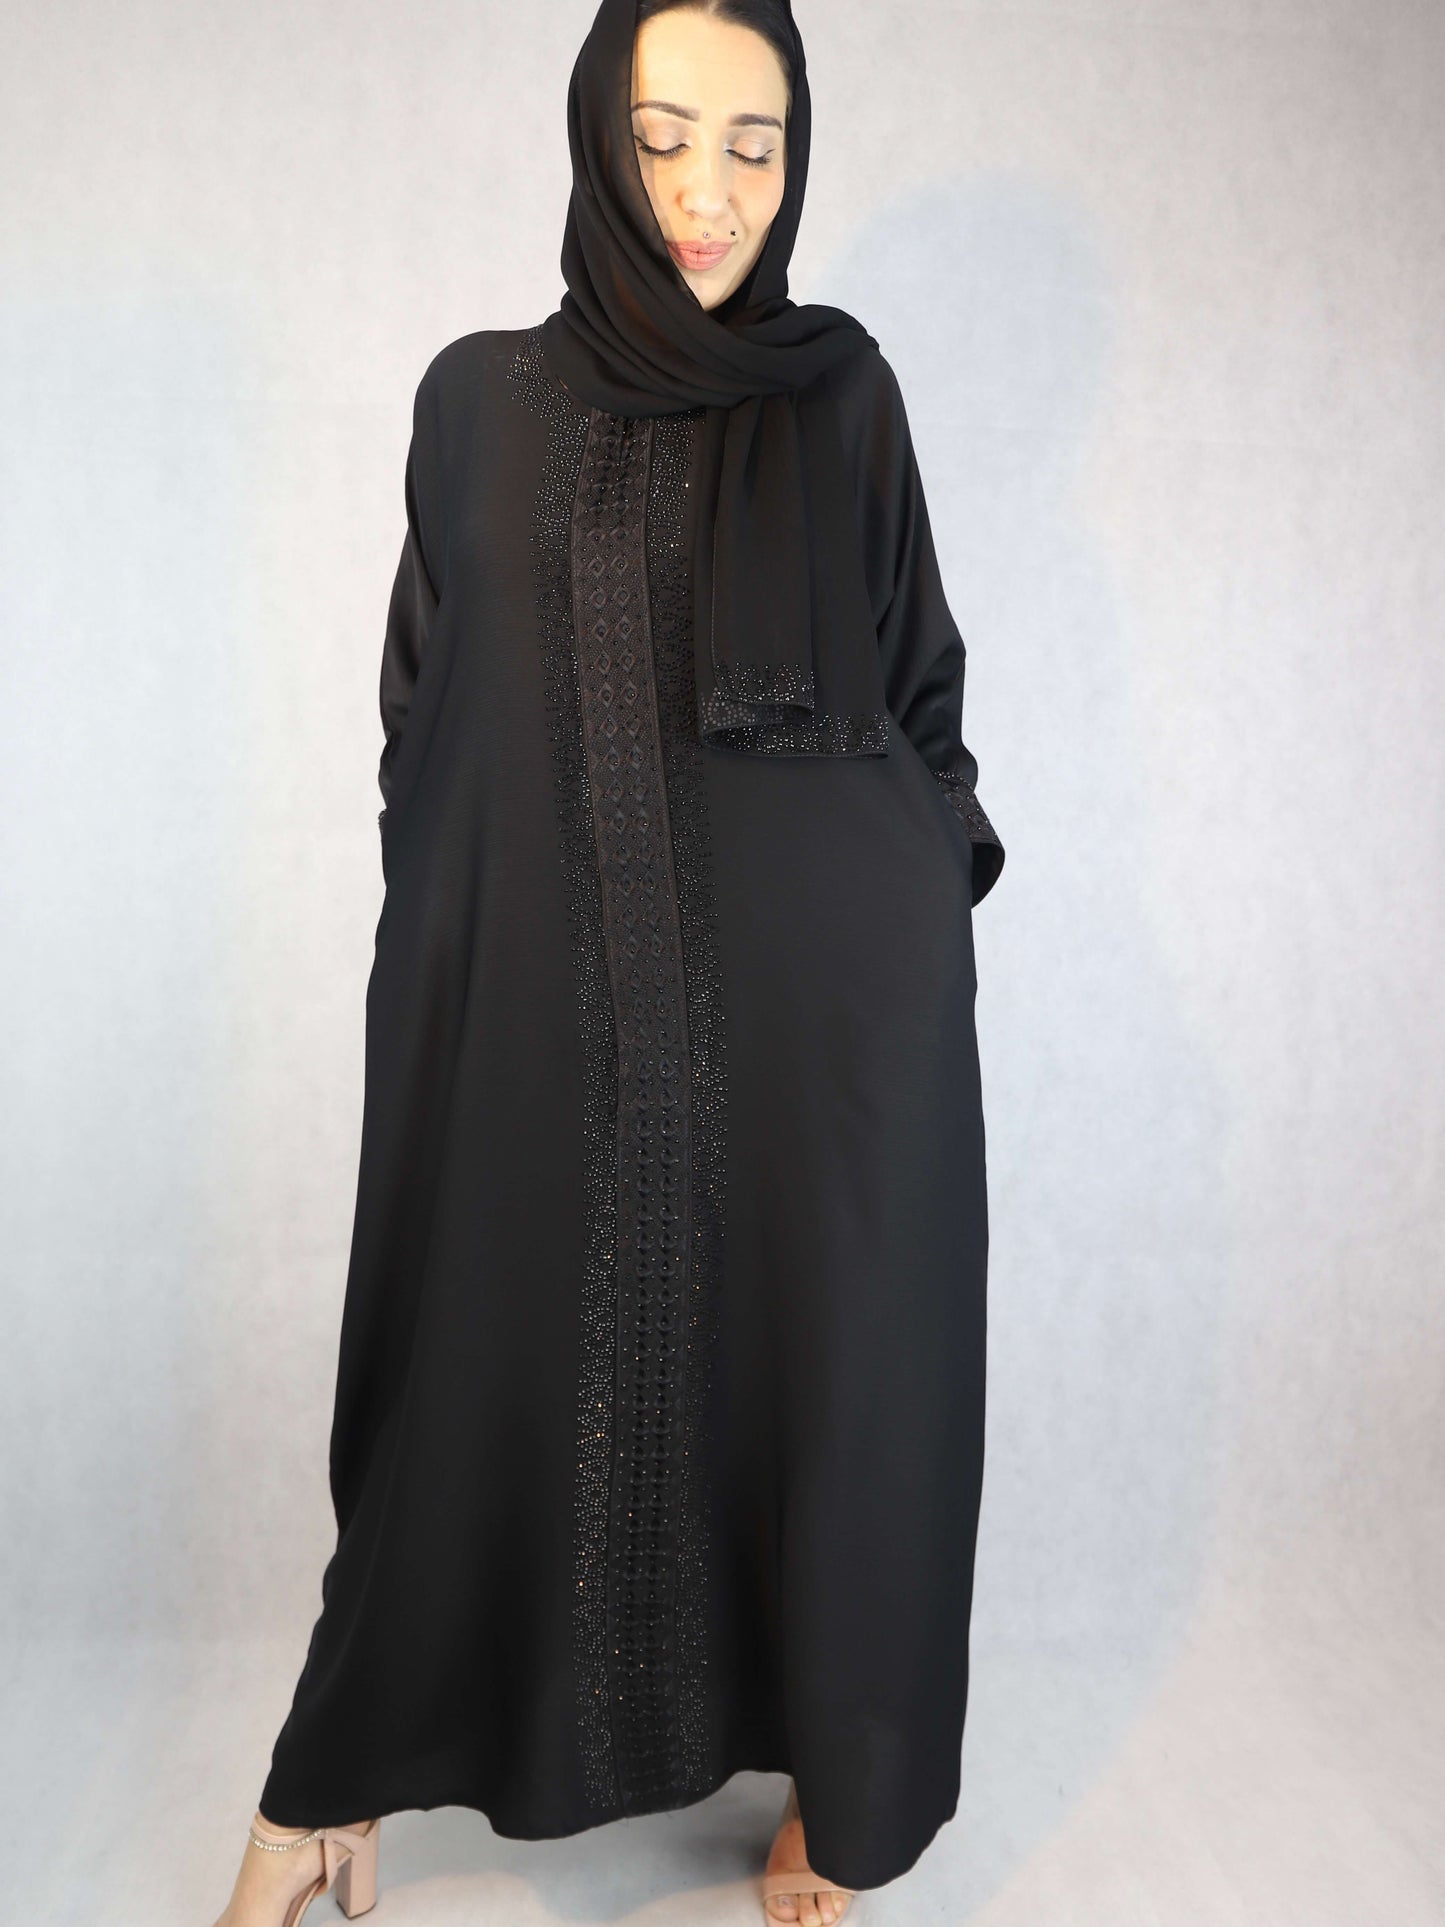 Black Abaya Full Lace With Stone Work For Women Abaya,womens abayas womens abayas designer abayas uk designer abayas uk abayas abayas abayas in london abayas online uk abayas online uk abayas bradford elegant open abayas elegant open abayas mens abayas uk mens abayas uk aab abayas open abayas open abayas wedding abayas uk wedding abayas uk abayas uk abayas uk abayas for women abayas for women open abayas black open abayas black